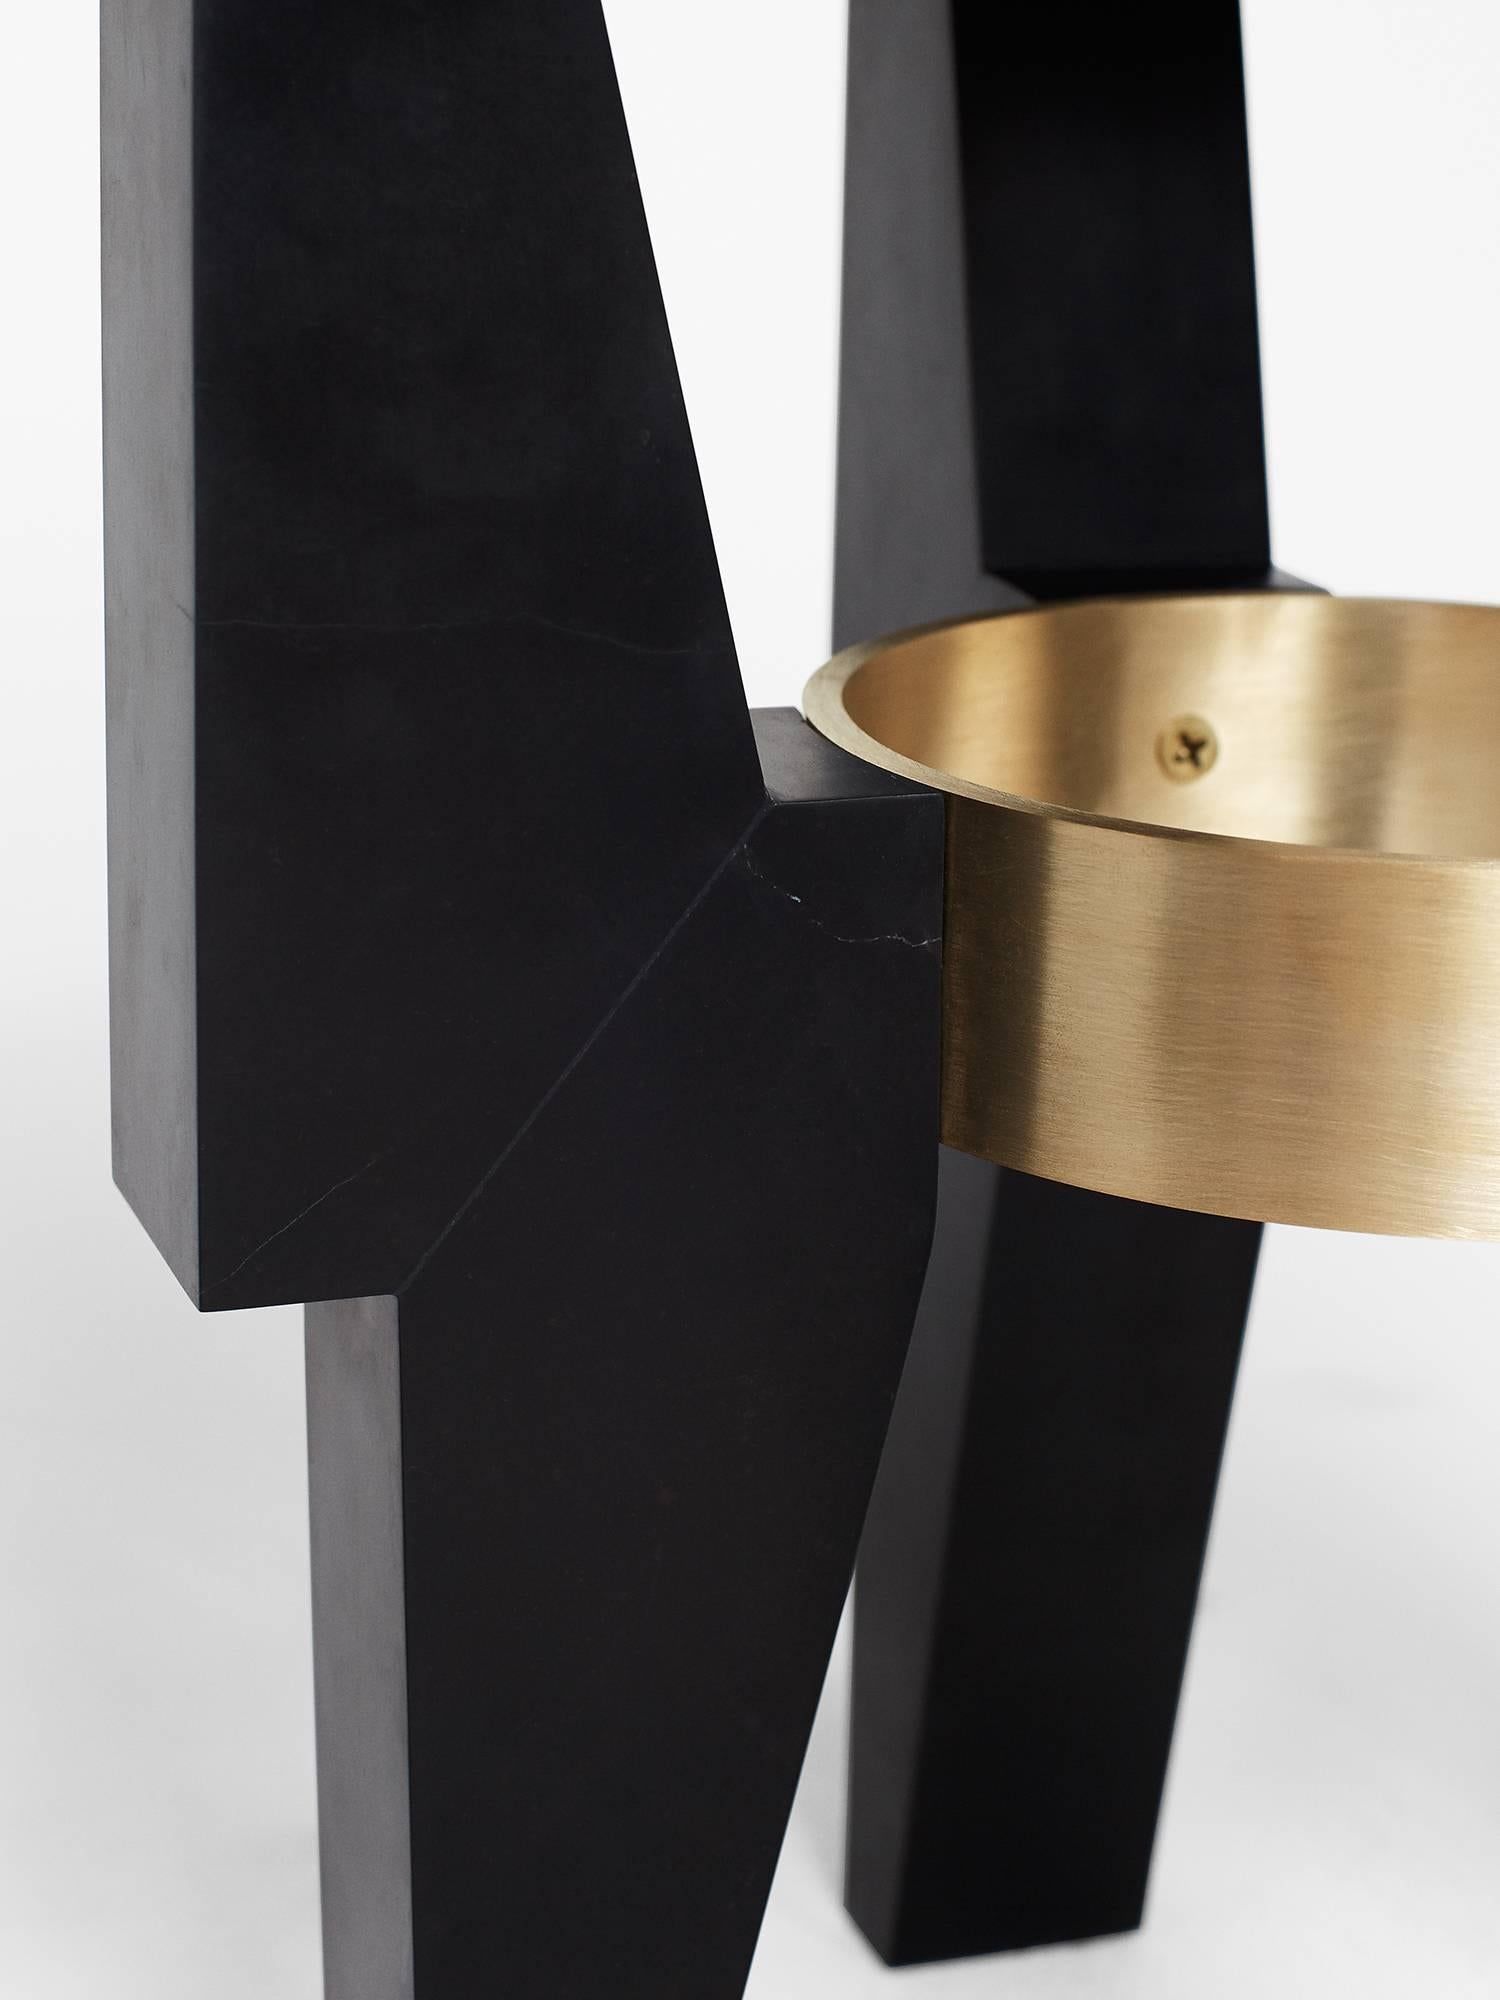 Hand sculpted by Los-Angeles based master stone carver, Nathan Hunt, the High Ring Side Table is made entirely from Nero Marquina marble and is complimented by a brass ring which ties each leg of the coffee table together.

Perfect as a side table